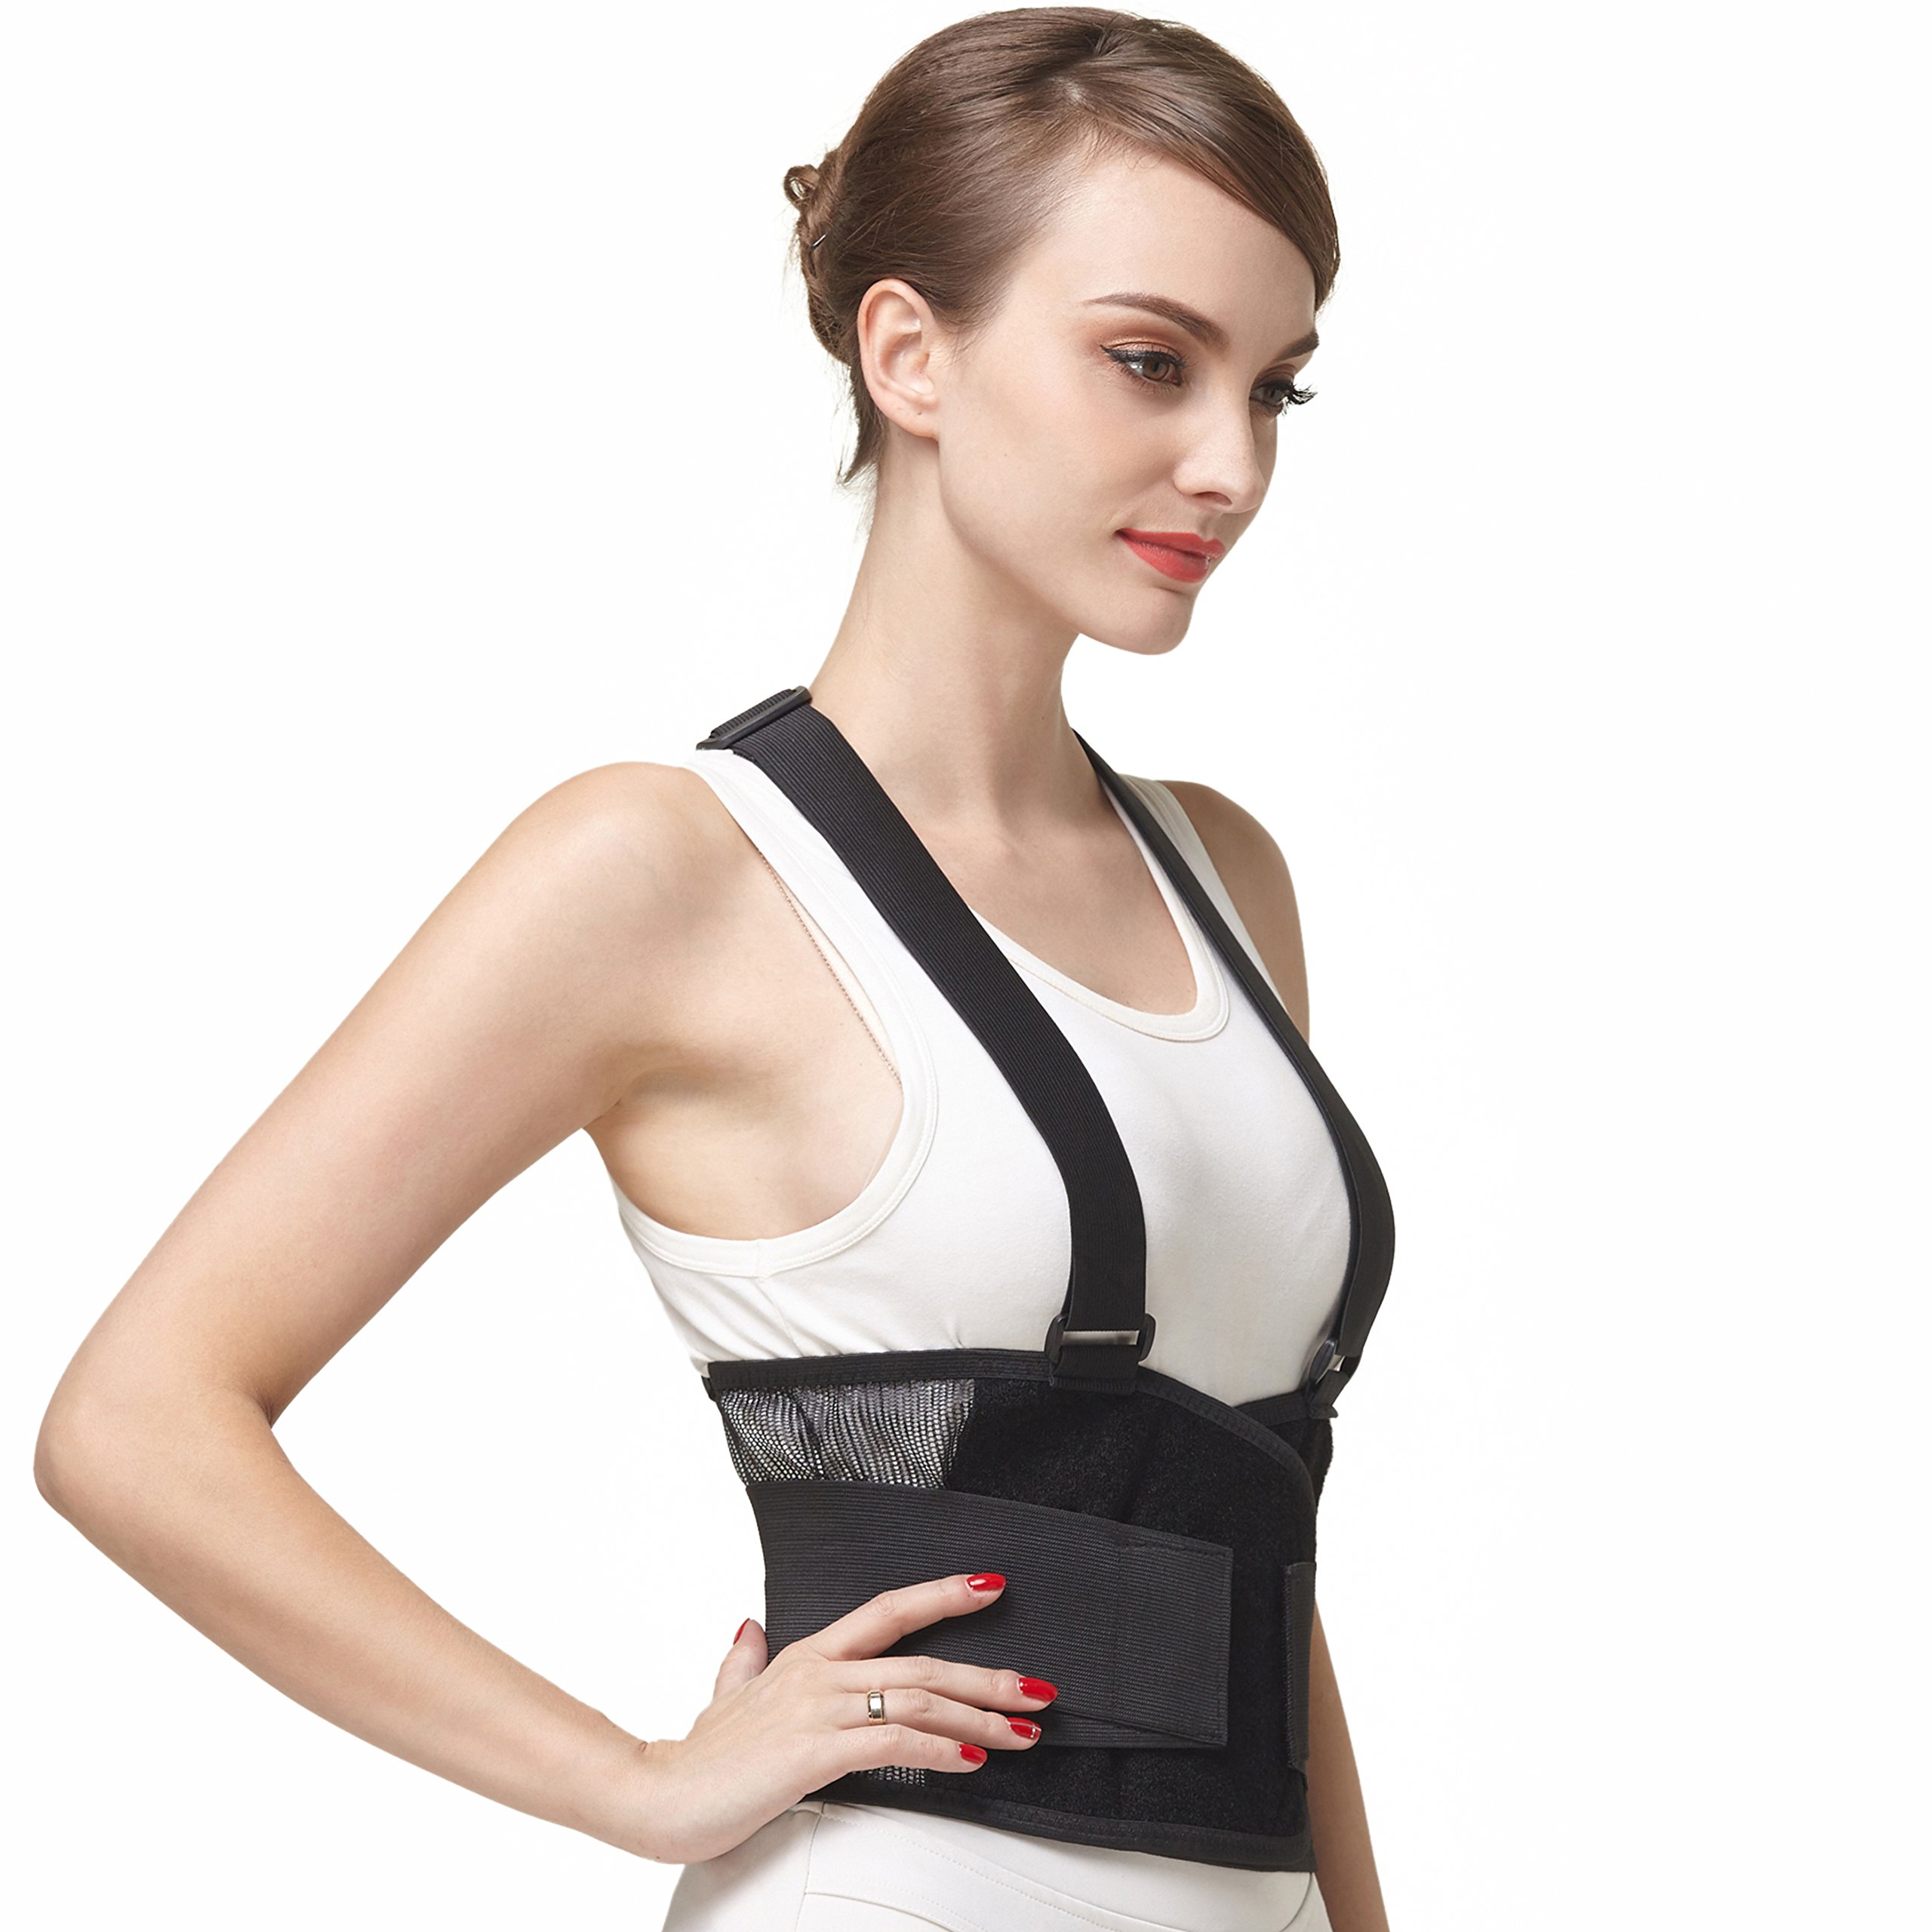 NeoTech Care Back Brace with Suspenders / Shoulder Straps - Light &  Breathable - Lumbar Support Belt for Lower Back Pain - Posture, Work, Gym -  Black Color (Size S) Small (Pack of 1)